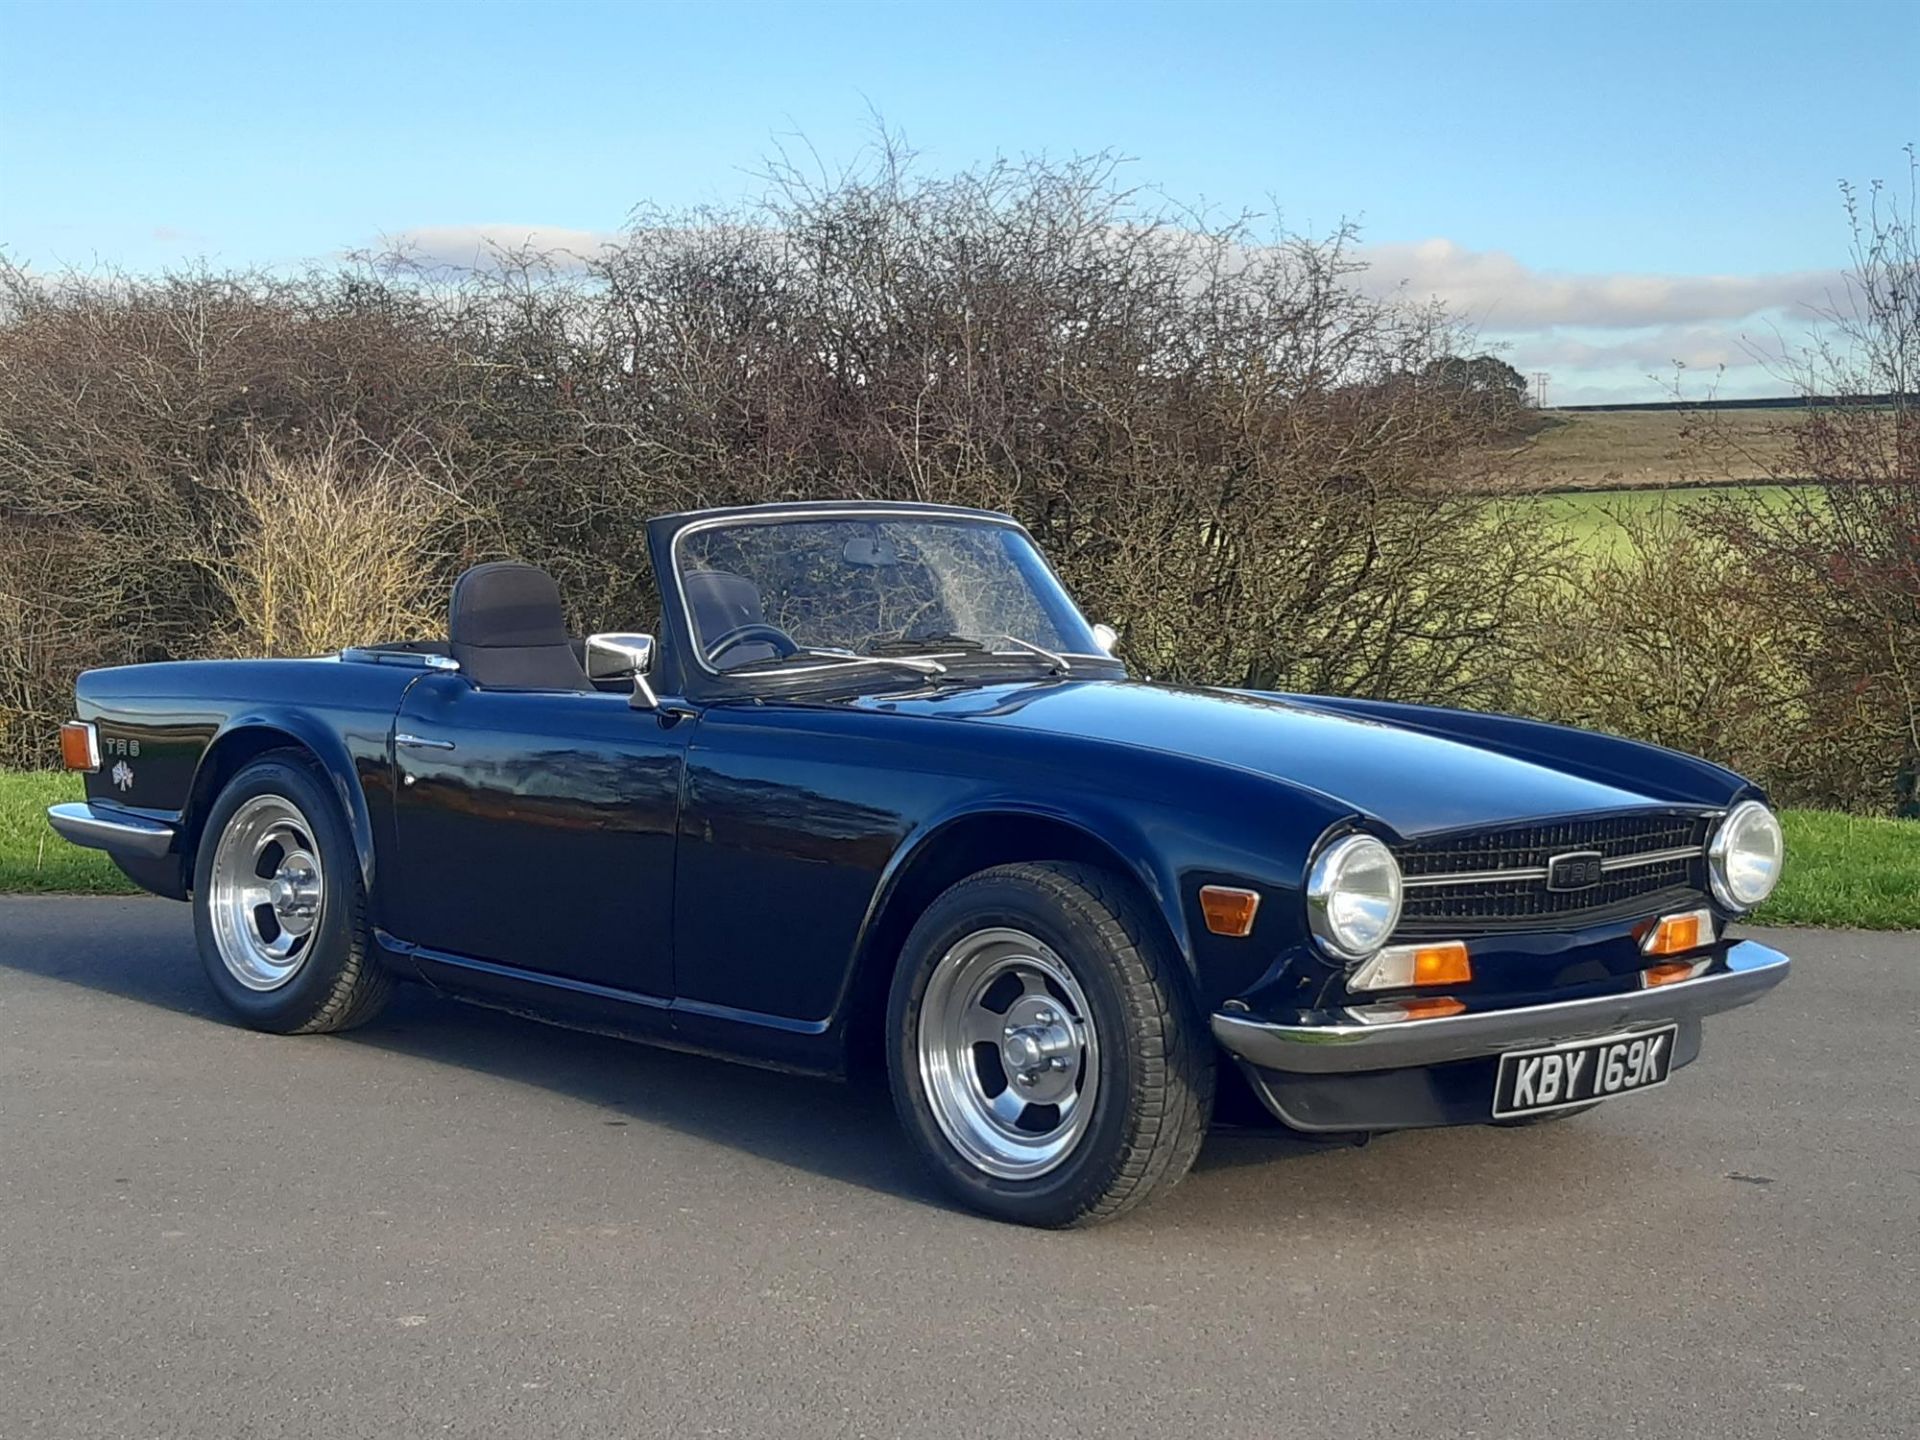 1971 Triumph TR6 - 'CP' Chassis 150bhp - Image 2 of 3